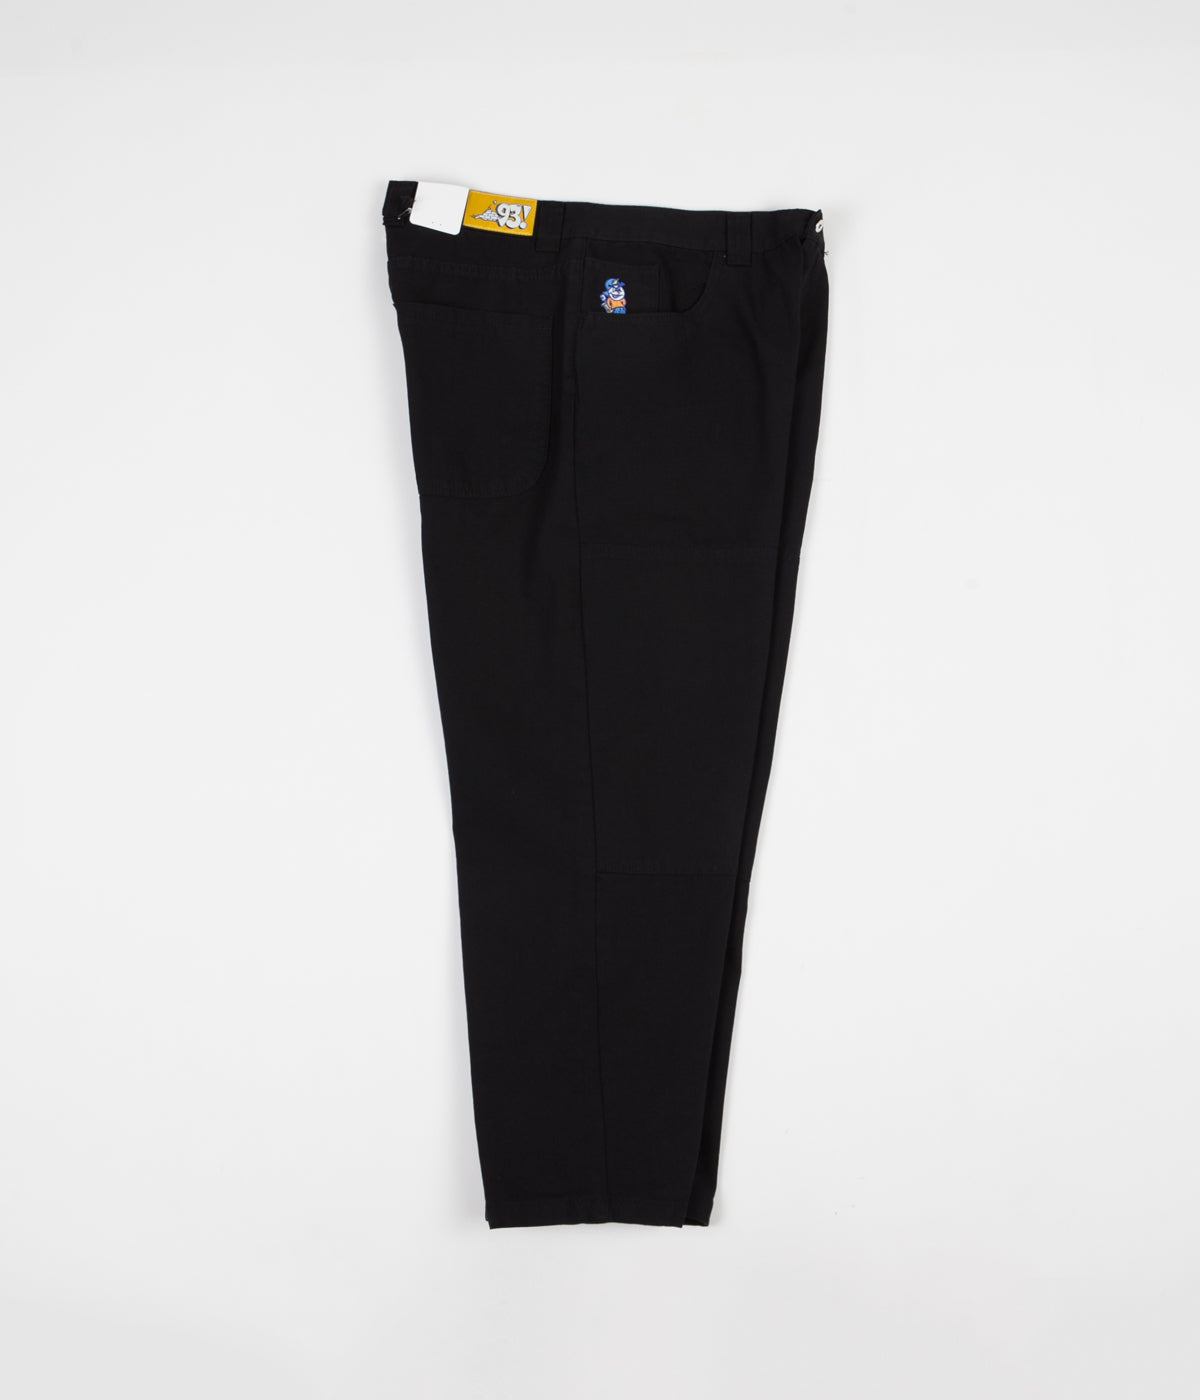 Black Plain RIFLE SHOOTING SUPPORTING TROUSERS Casual Wear Men